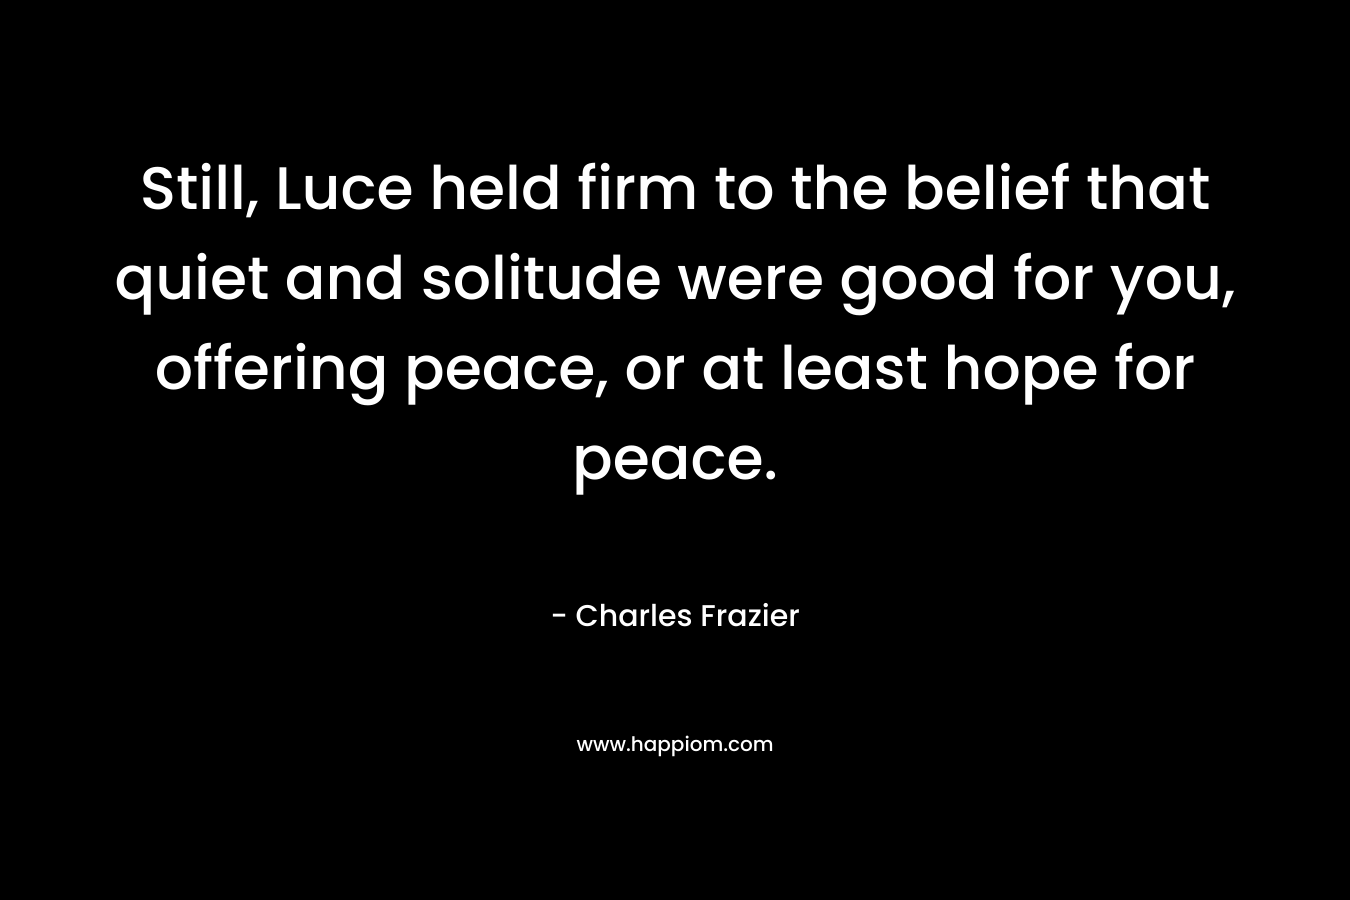 Still, Luce held firm to the belief that quiet and solitude were good for you, offering peace, or at least hope for peace. – Charles Frazier